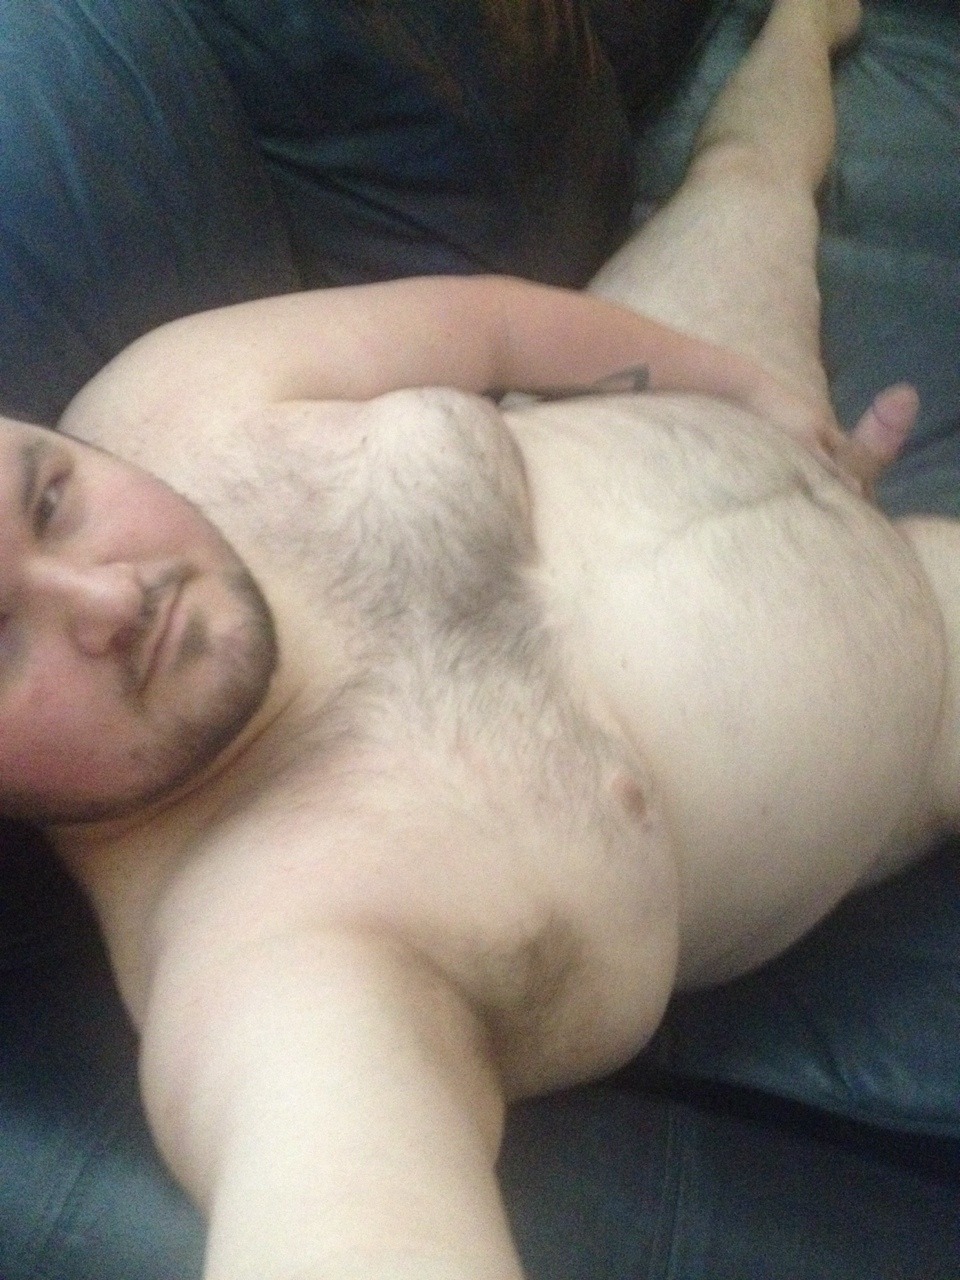 gulobear:  chubbyaddiction:  bigc-kc52:  This is what I do on my time alone. Naked